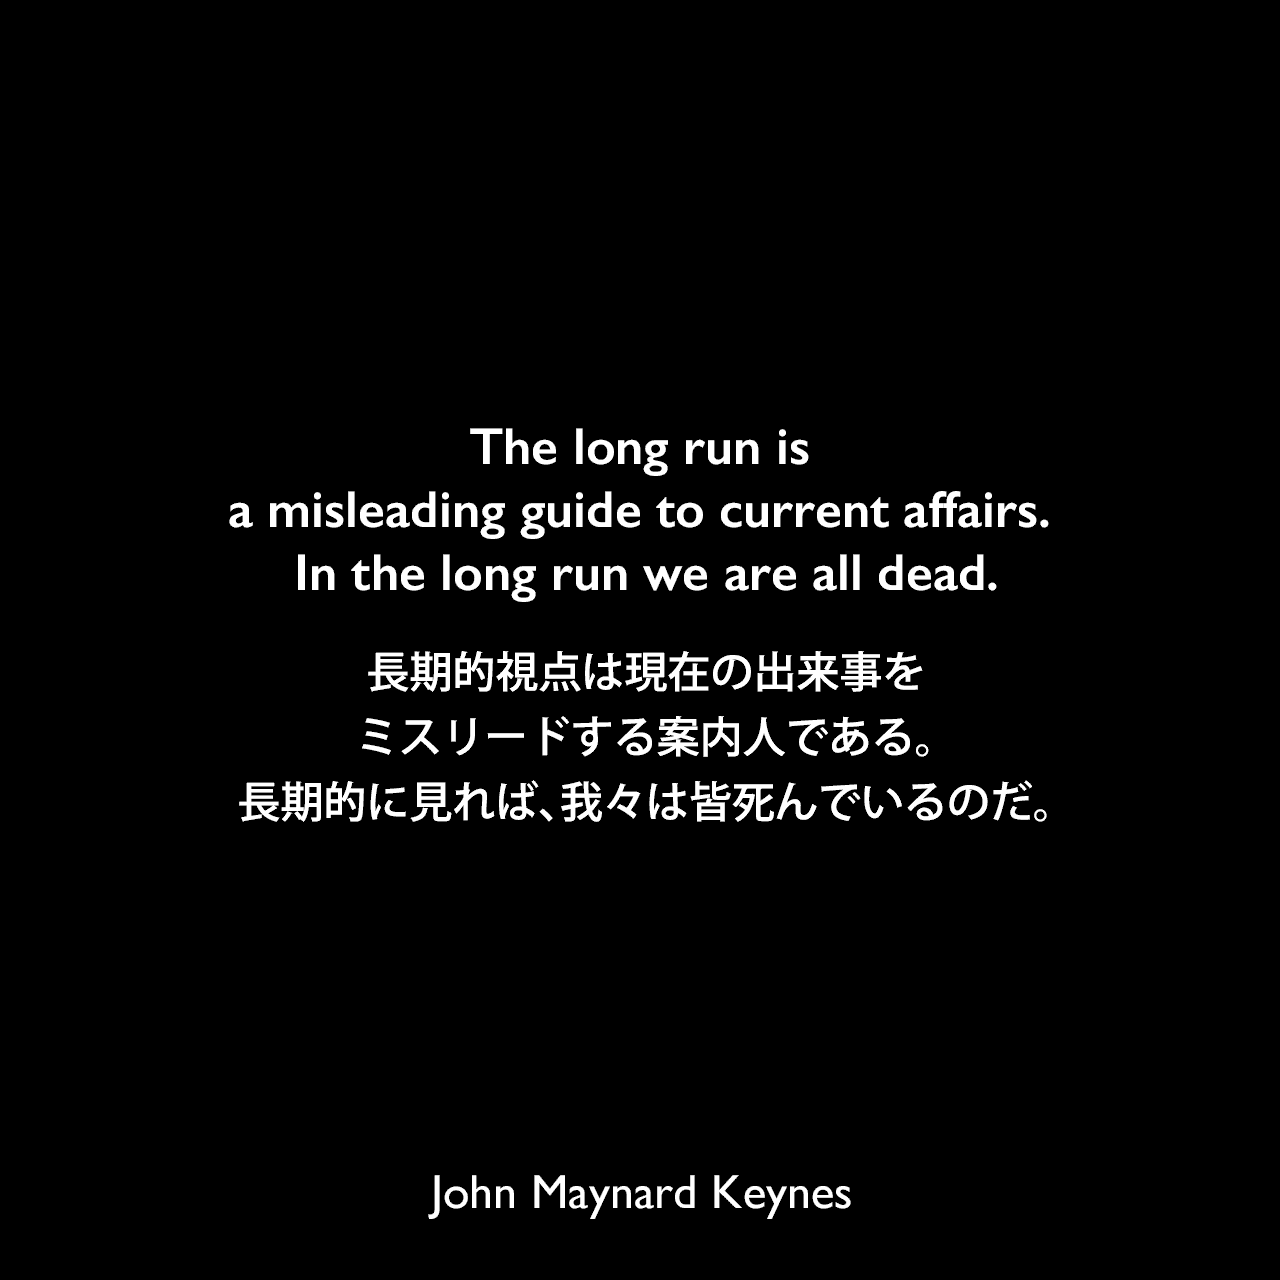 The long run is a misleading guide to current affairs. In the long run we are all dead.長期的視点は現在の出来事をミスリードする案内人である。長期的に見れば、我々は皆死んでいるのだ。（ケインズの本：A Tract on Monetary Reform）John Maynard Keynes